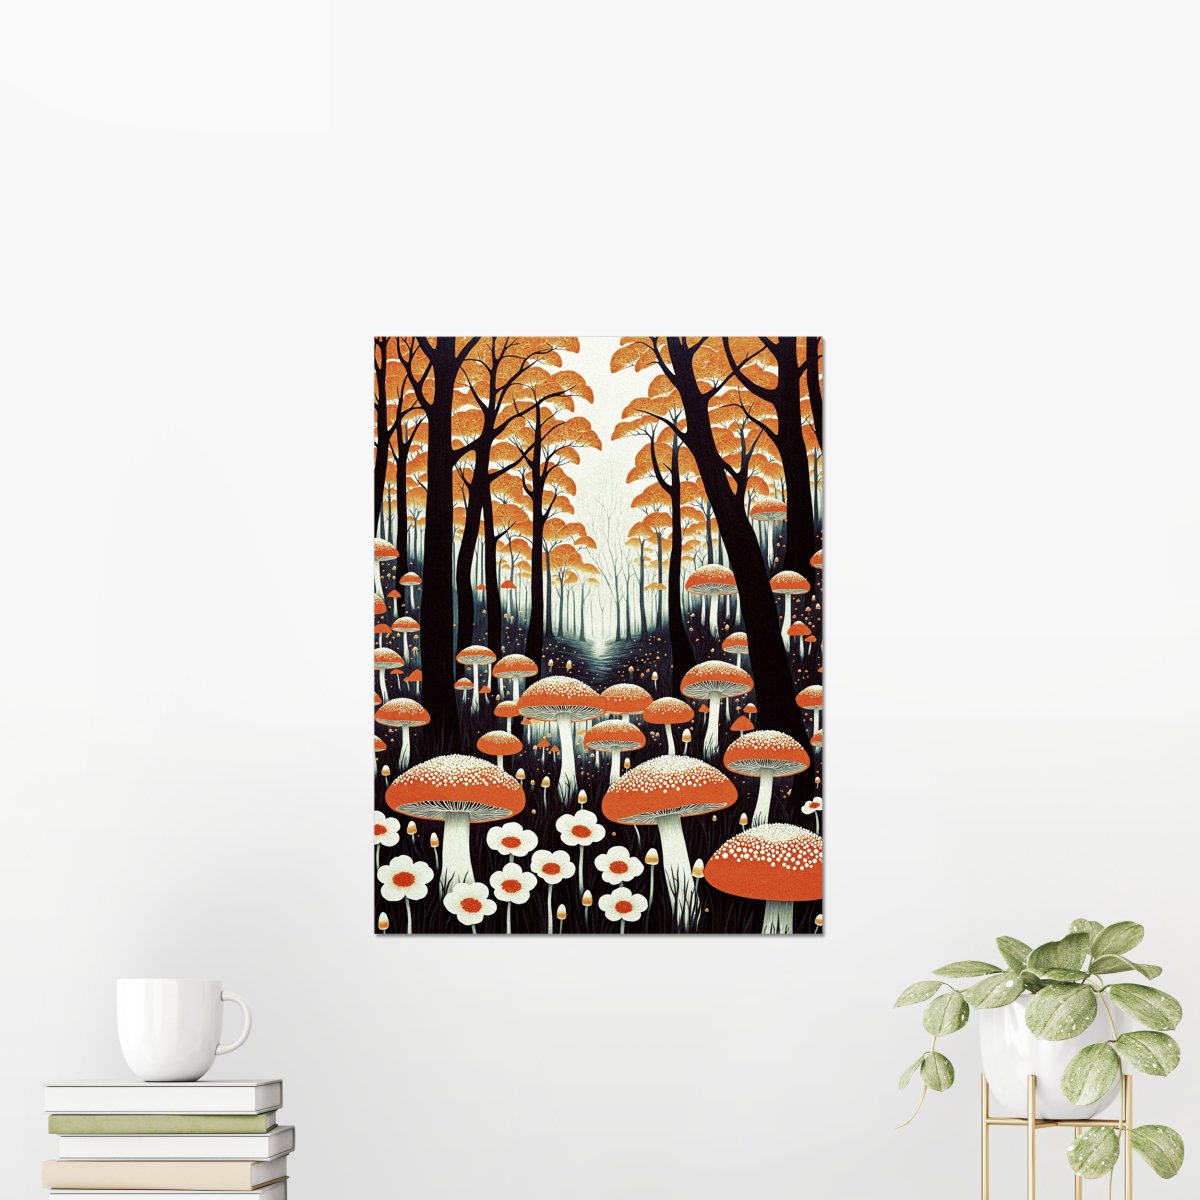 Terracotta grove - Art print - Poster - Ever colorful